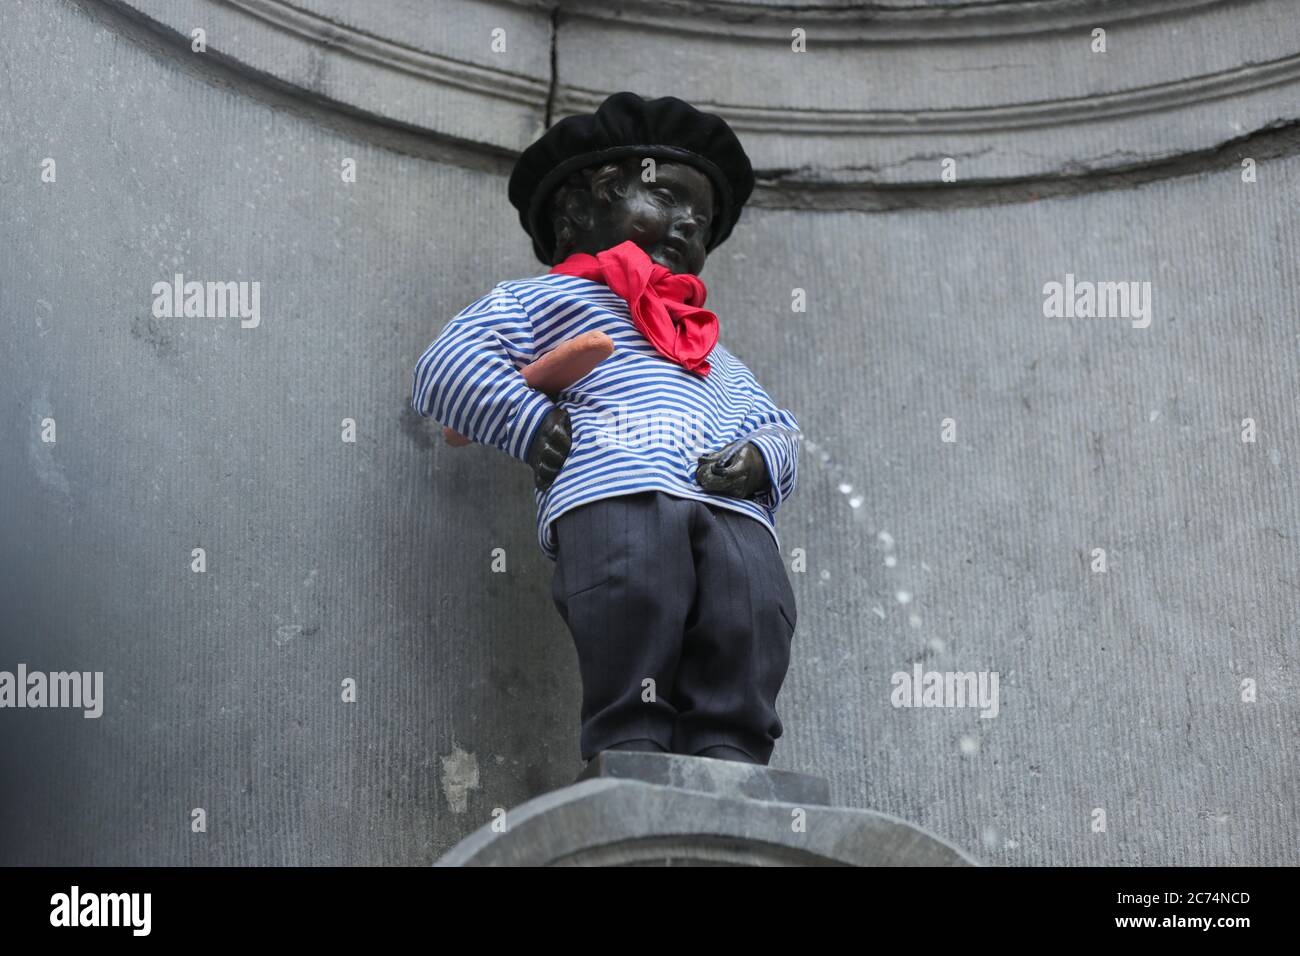 Brussels, Belgium. 14th July, 2020. The Manneken-Pis is seen in a suit with beret and baguette in Brussels, Belgium, July 14, 2020. Manneken-Pis, the symbol of Brussels folklore, gets costumes at major events. He wore a suit with beret and baguette on Tuesday to commemorate the French national day which falls on July 14 every year. Credit: Zheng Huansong/Xinhua/Alamy Live News Stock Photo